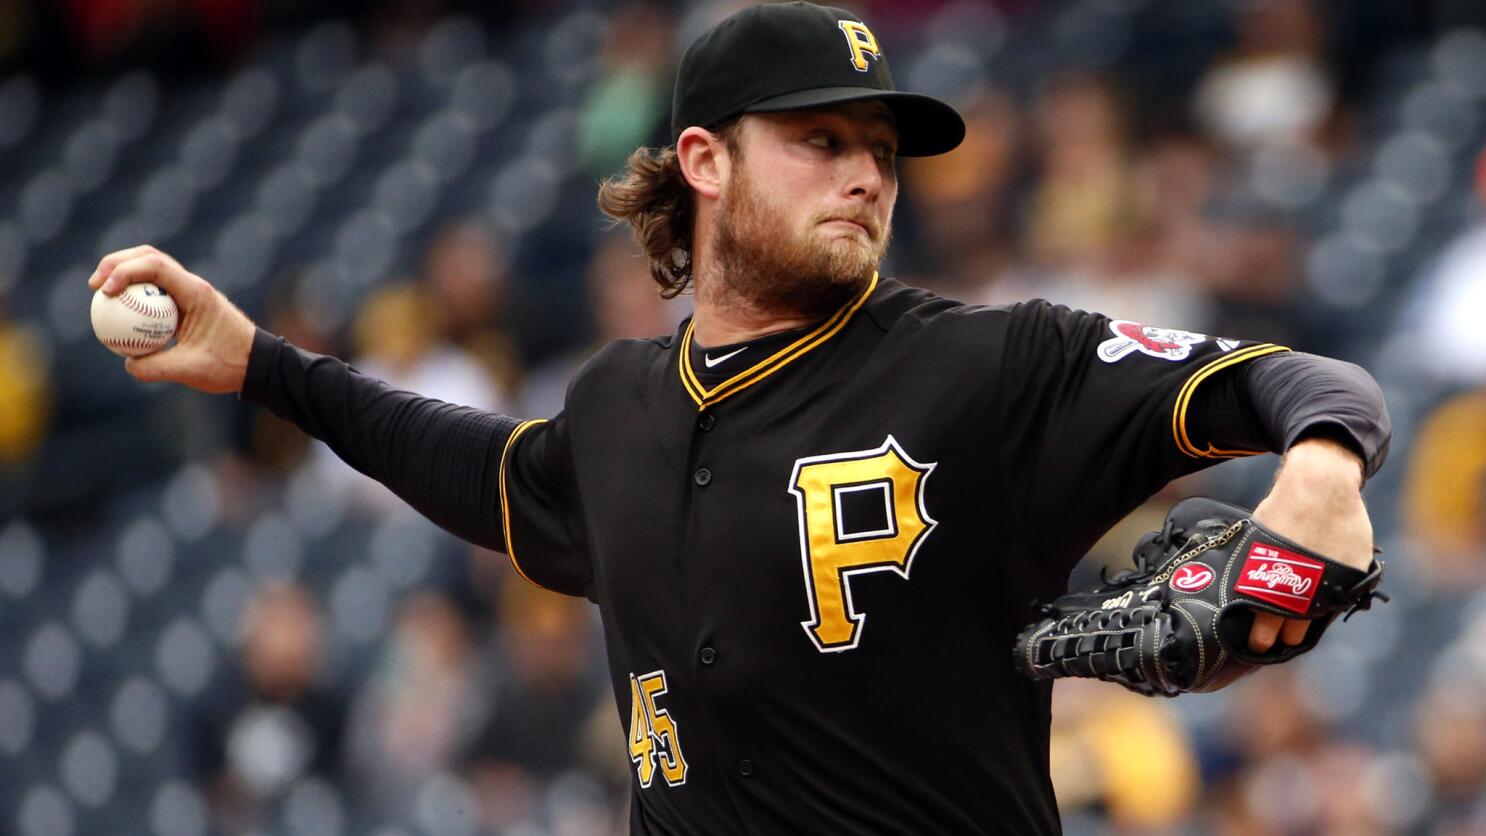 Gerrit Cole to start for Pirates in wild-card game against Cubs